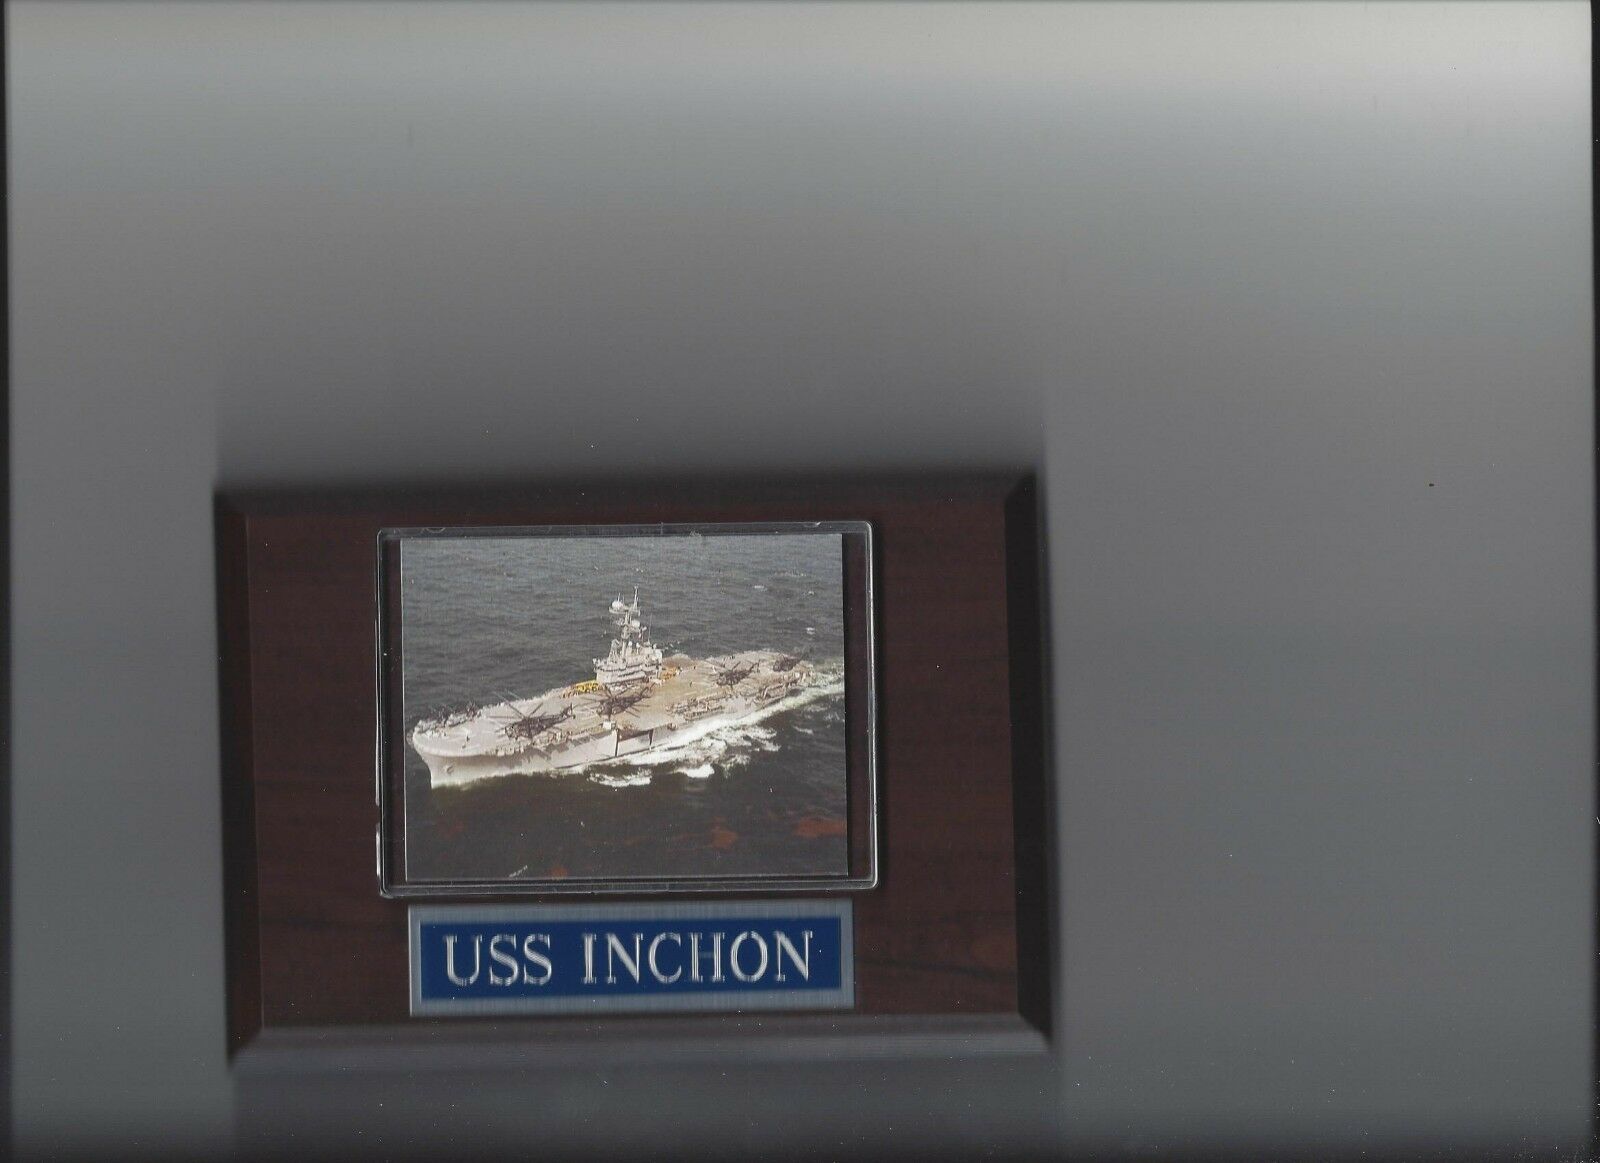 Primary image for USS INCHON PLAQUE NAVY US USA MILITARY LPH-12 SHIP AMPHIBOUS ASSAULT